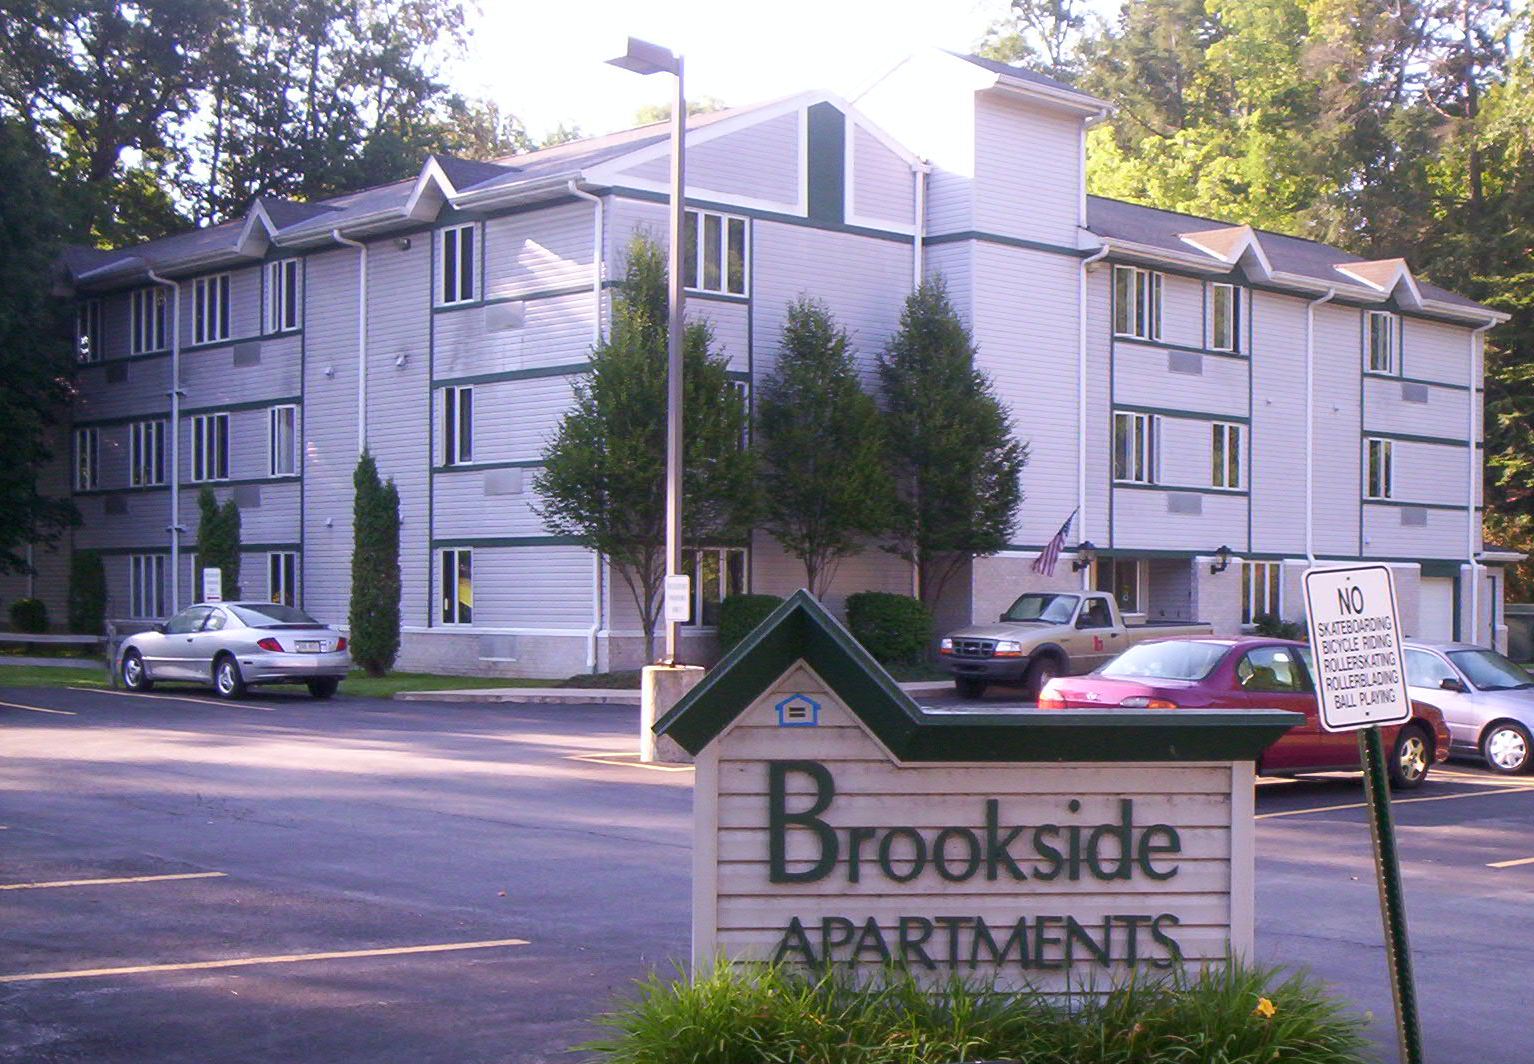 BROOKSIDE APARTMENTS